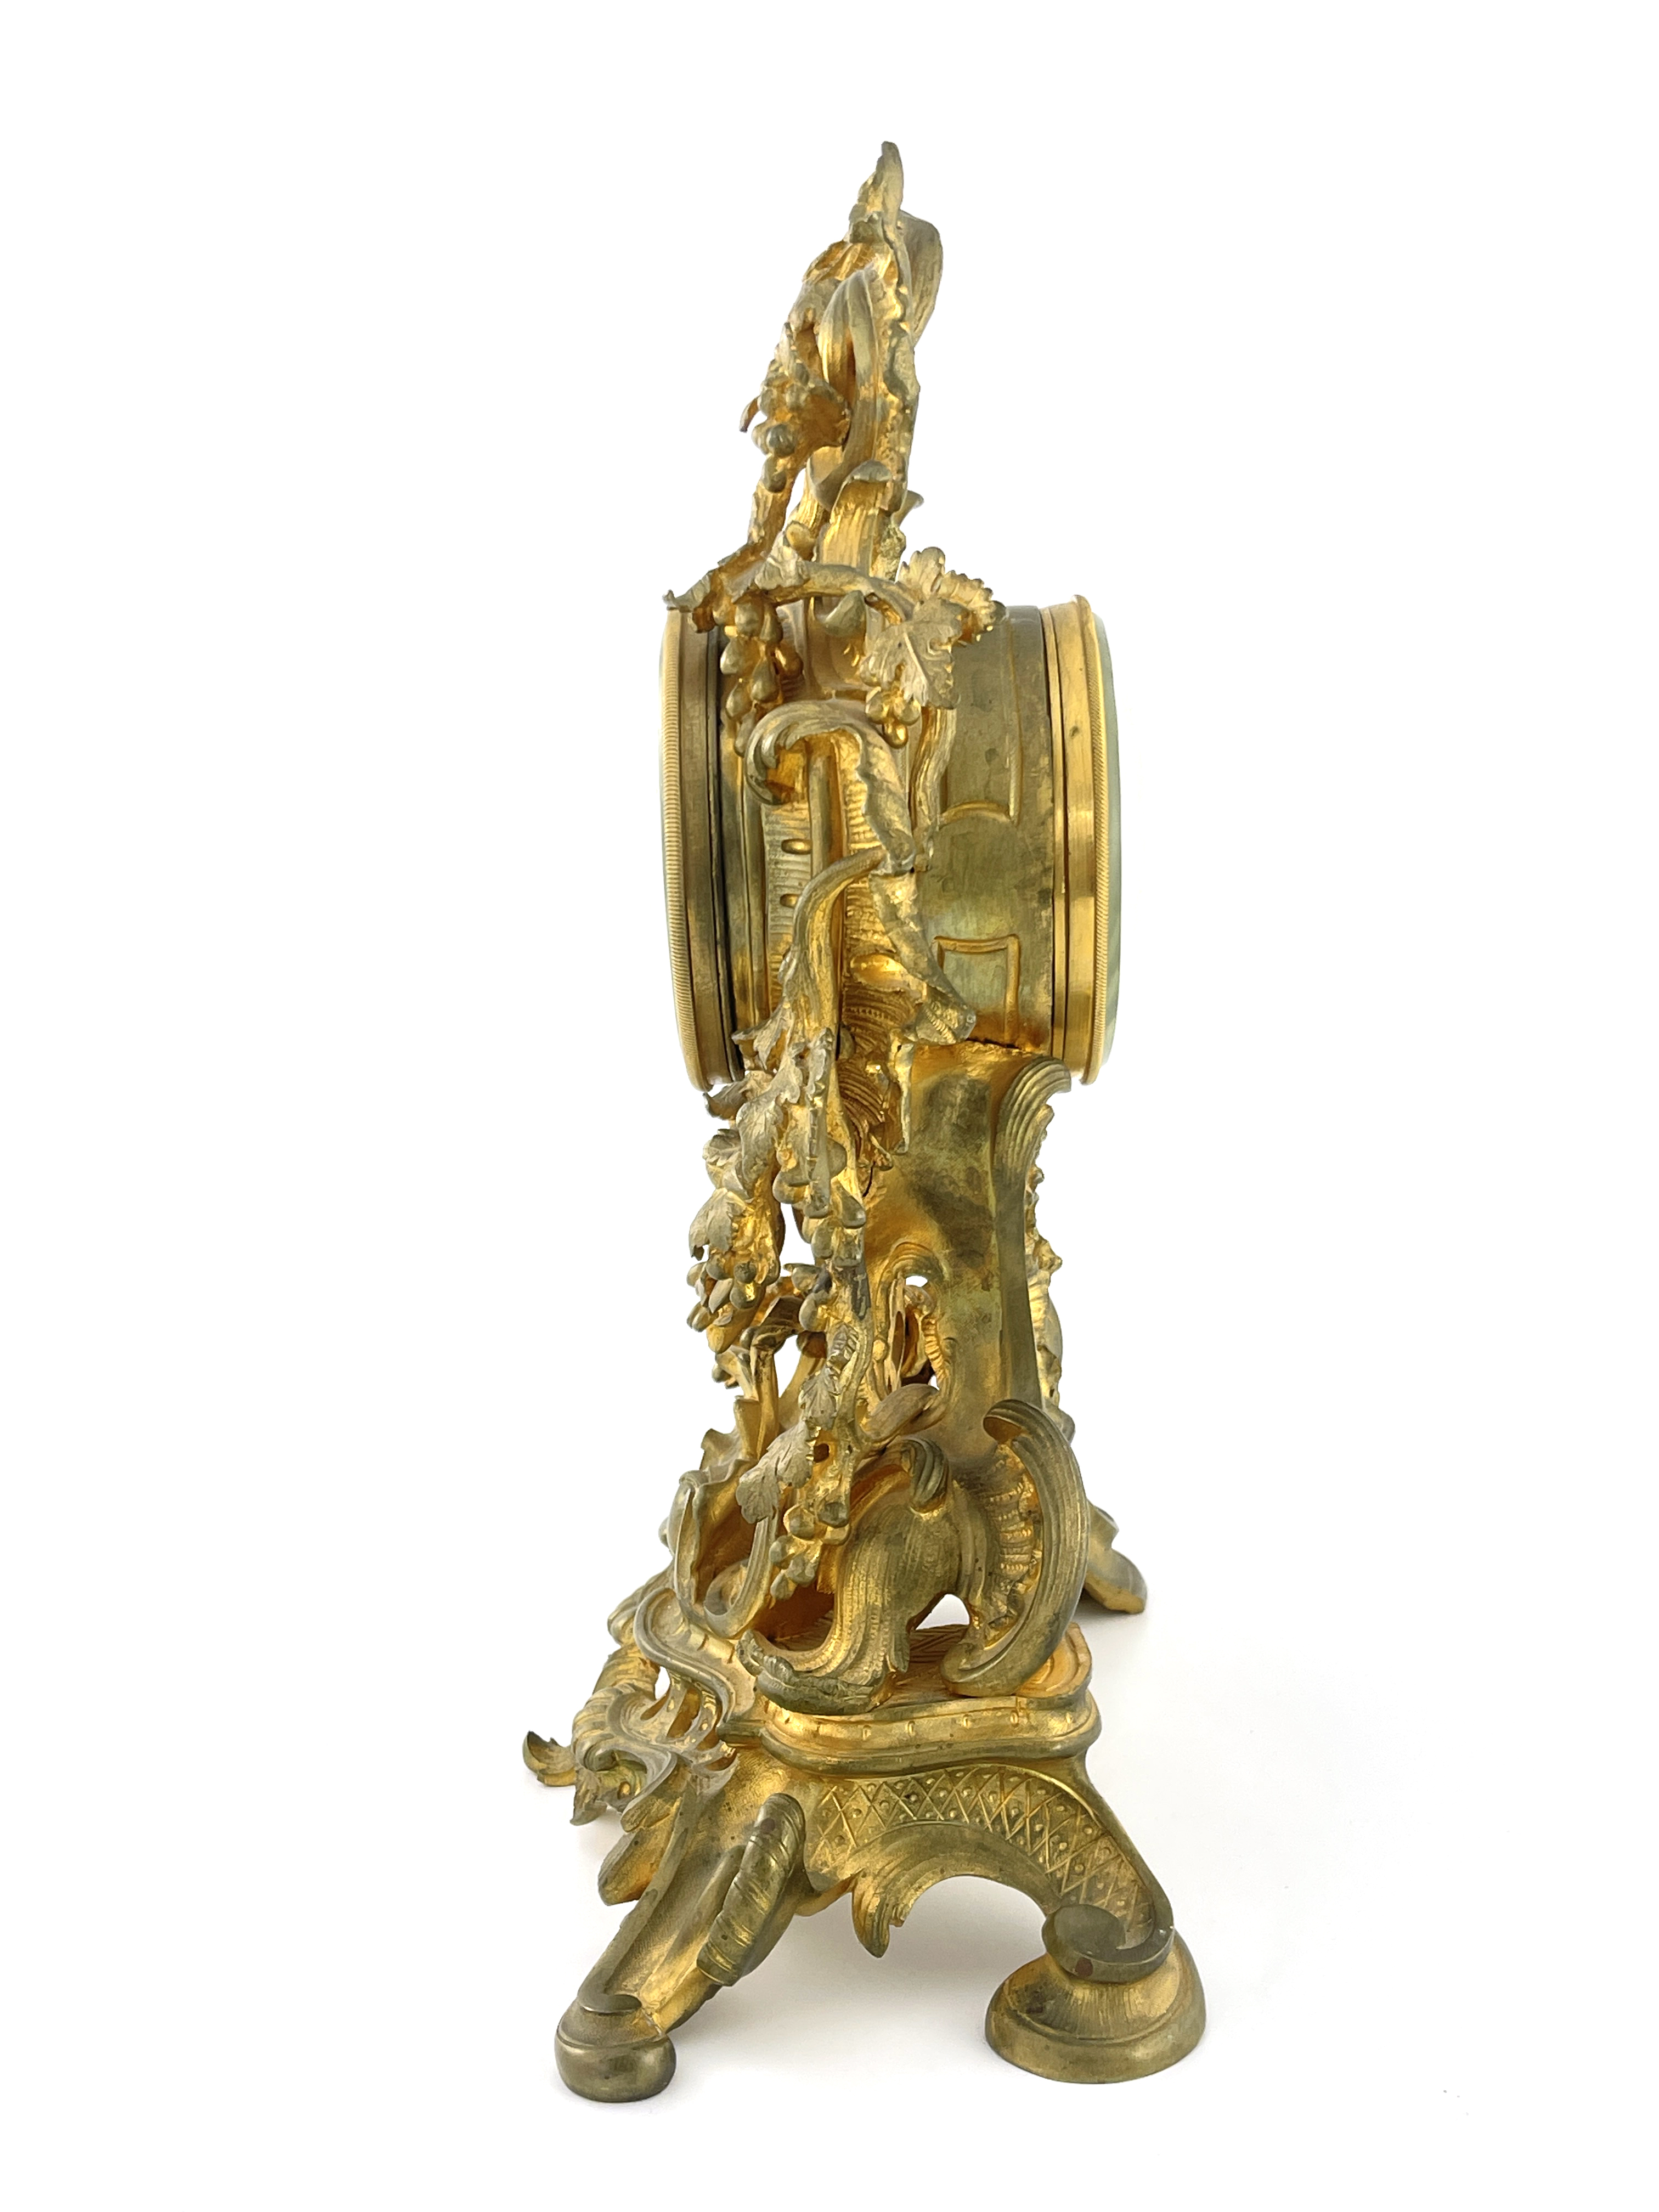 Raingo Freres, a mid 19th century French ormolu and gilt brass mantel clock, relief moulded Rococo - Image 2 of 4